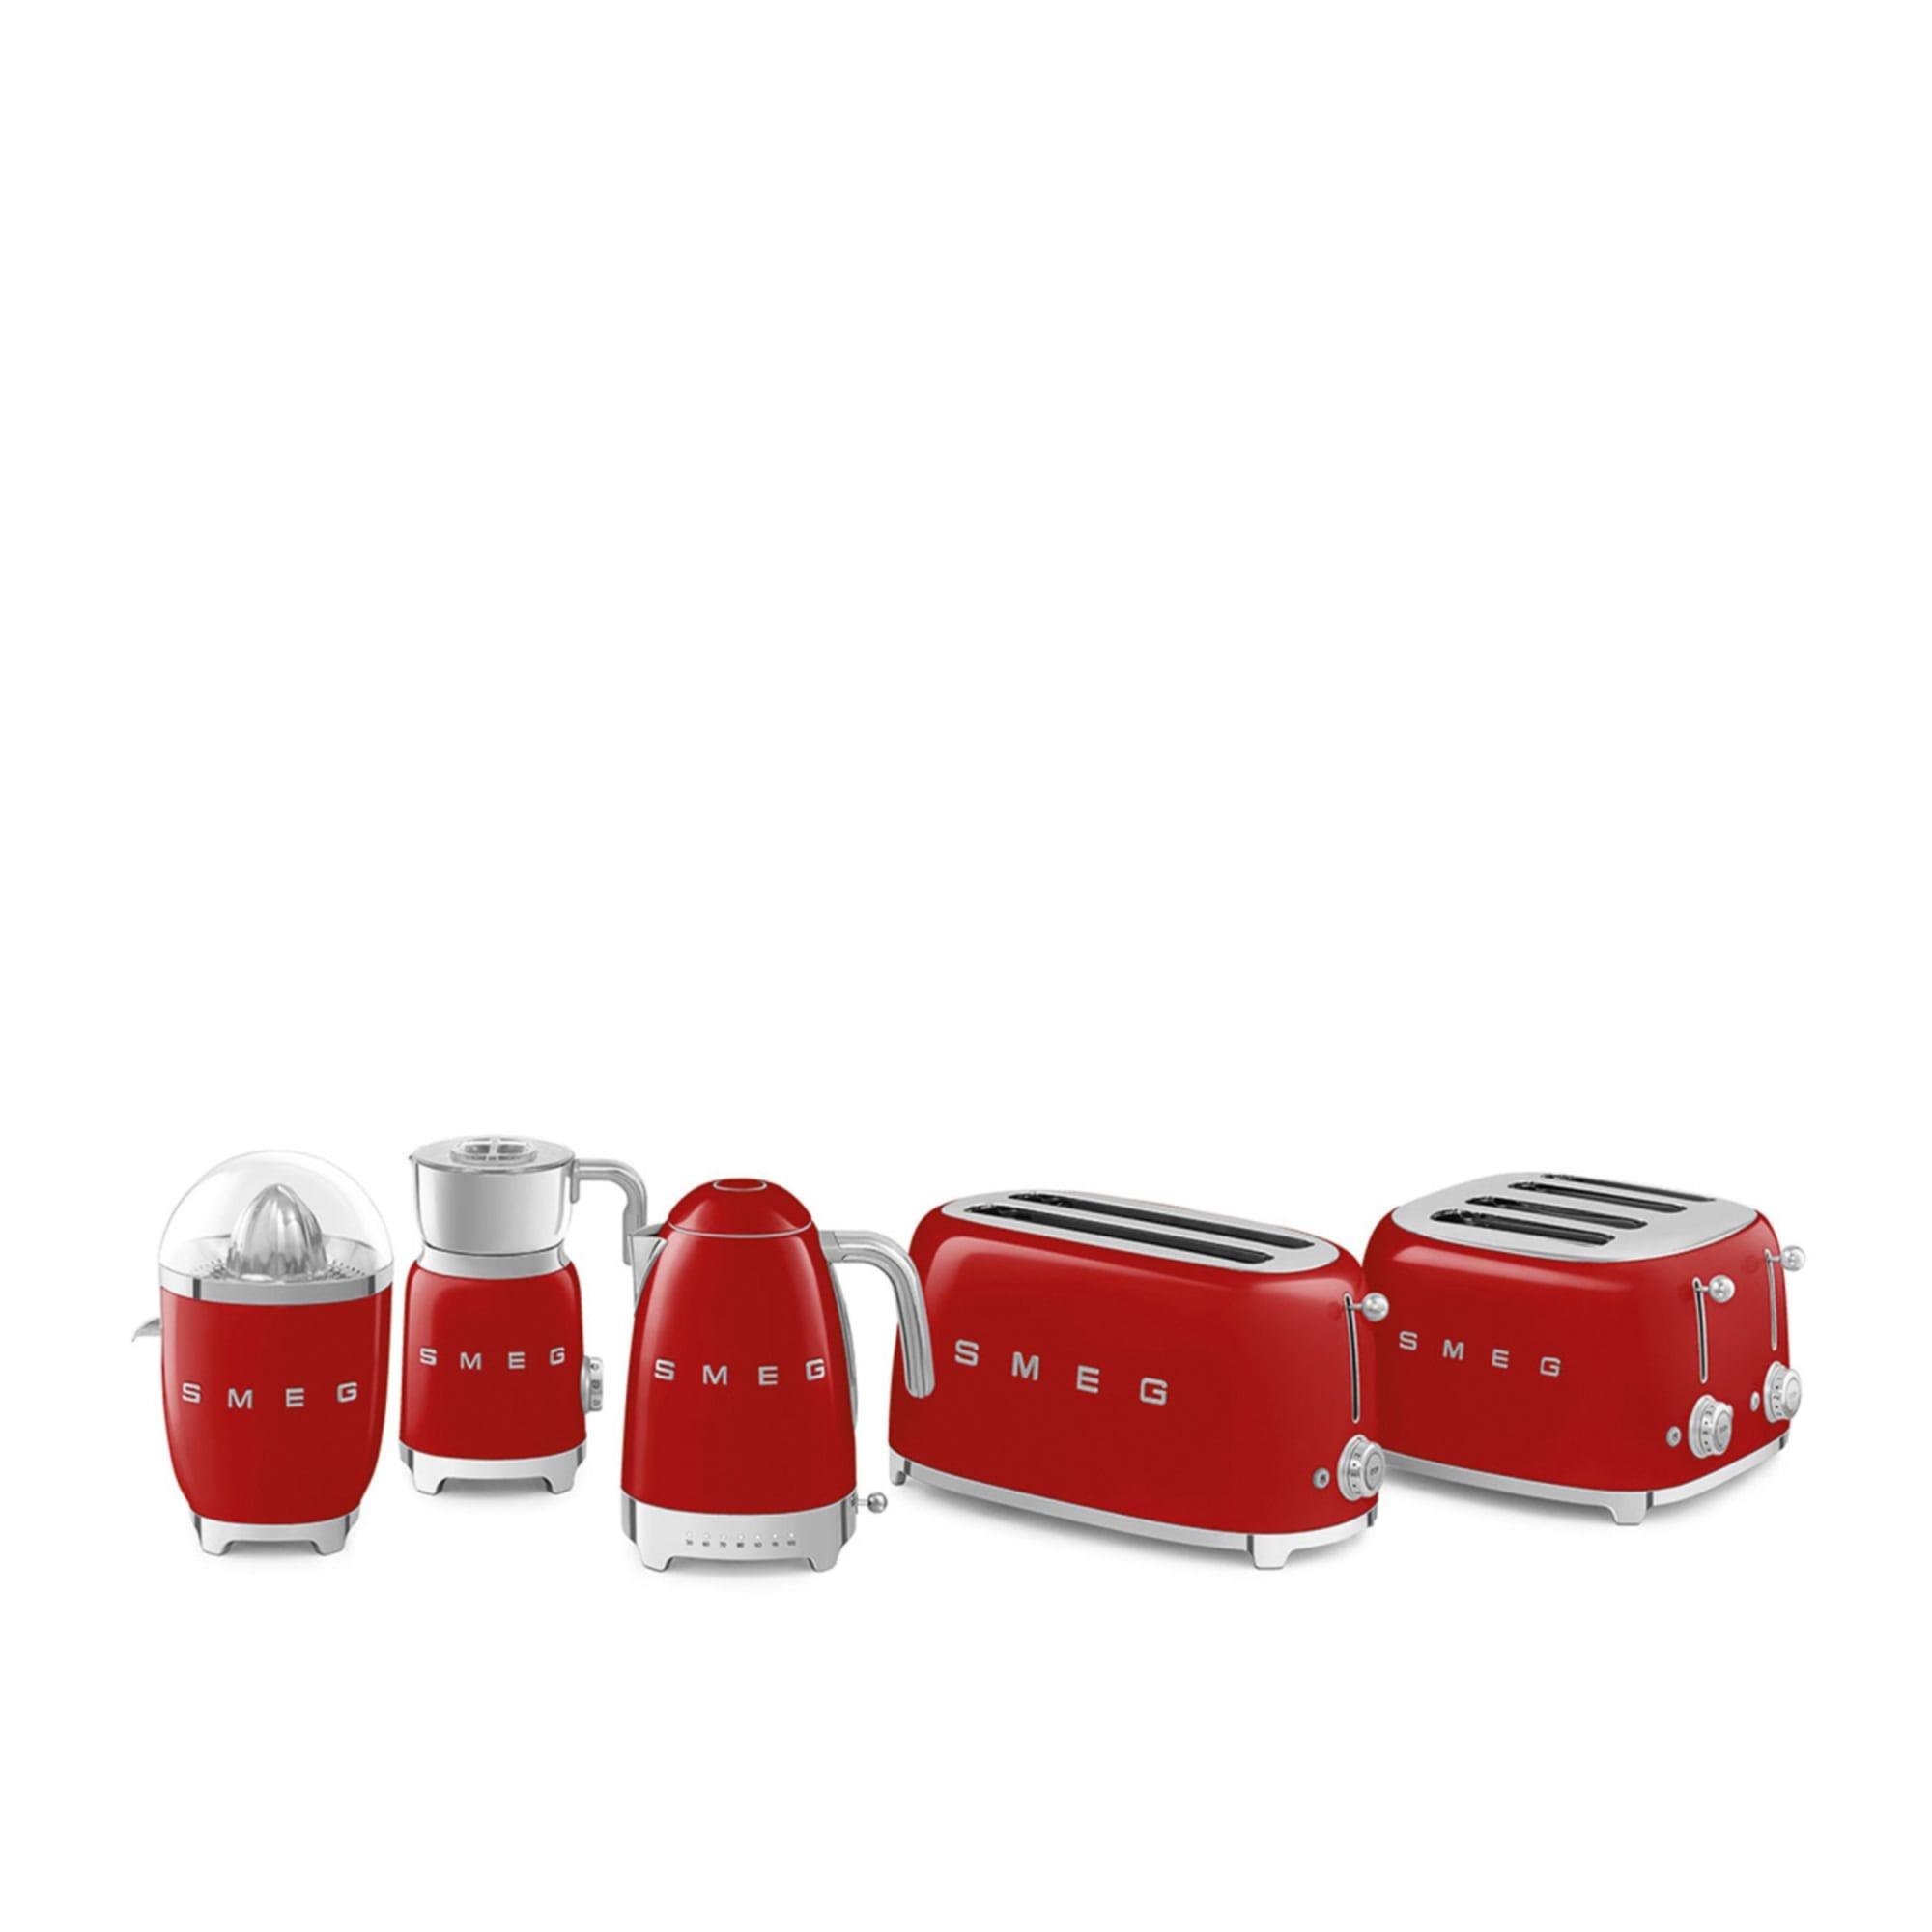 Smeg 50s Retro Style Variable Temperature Kettle 1 7L Red Image 4